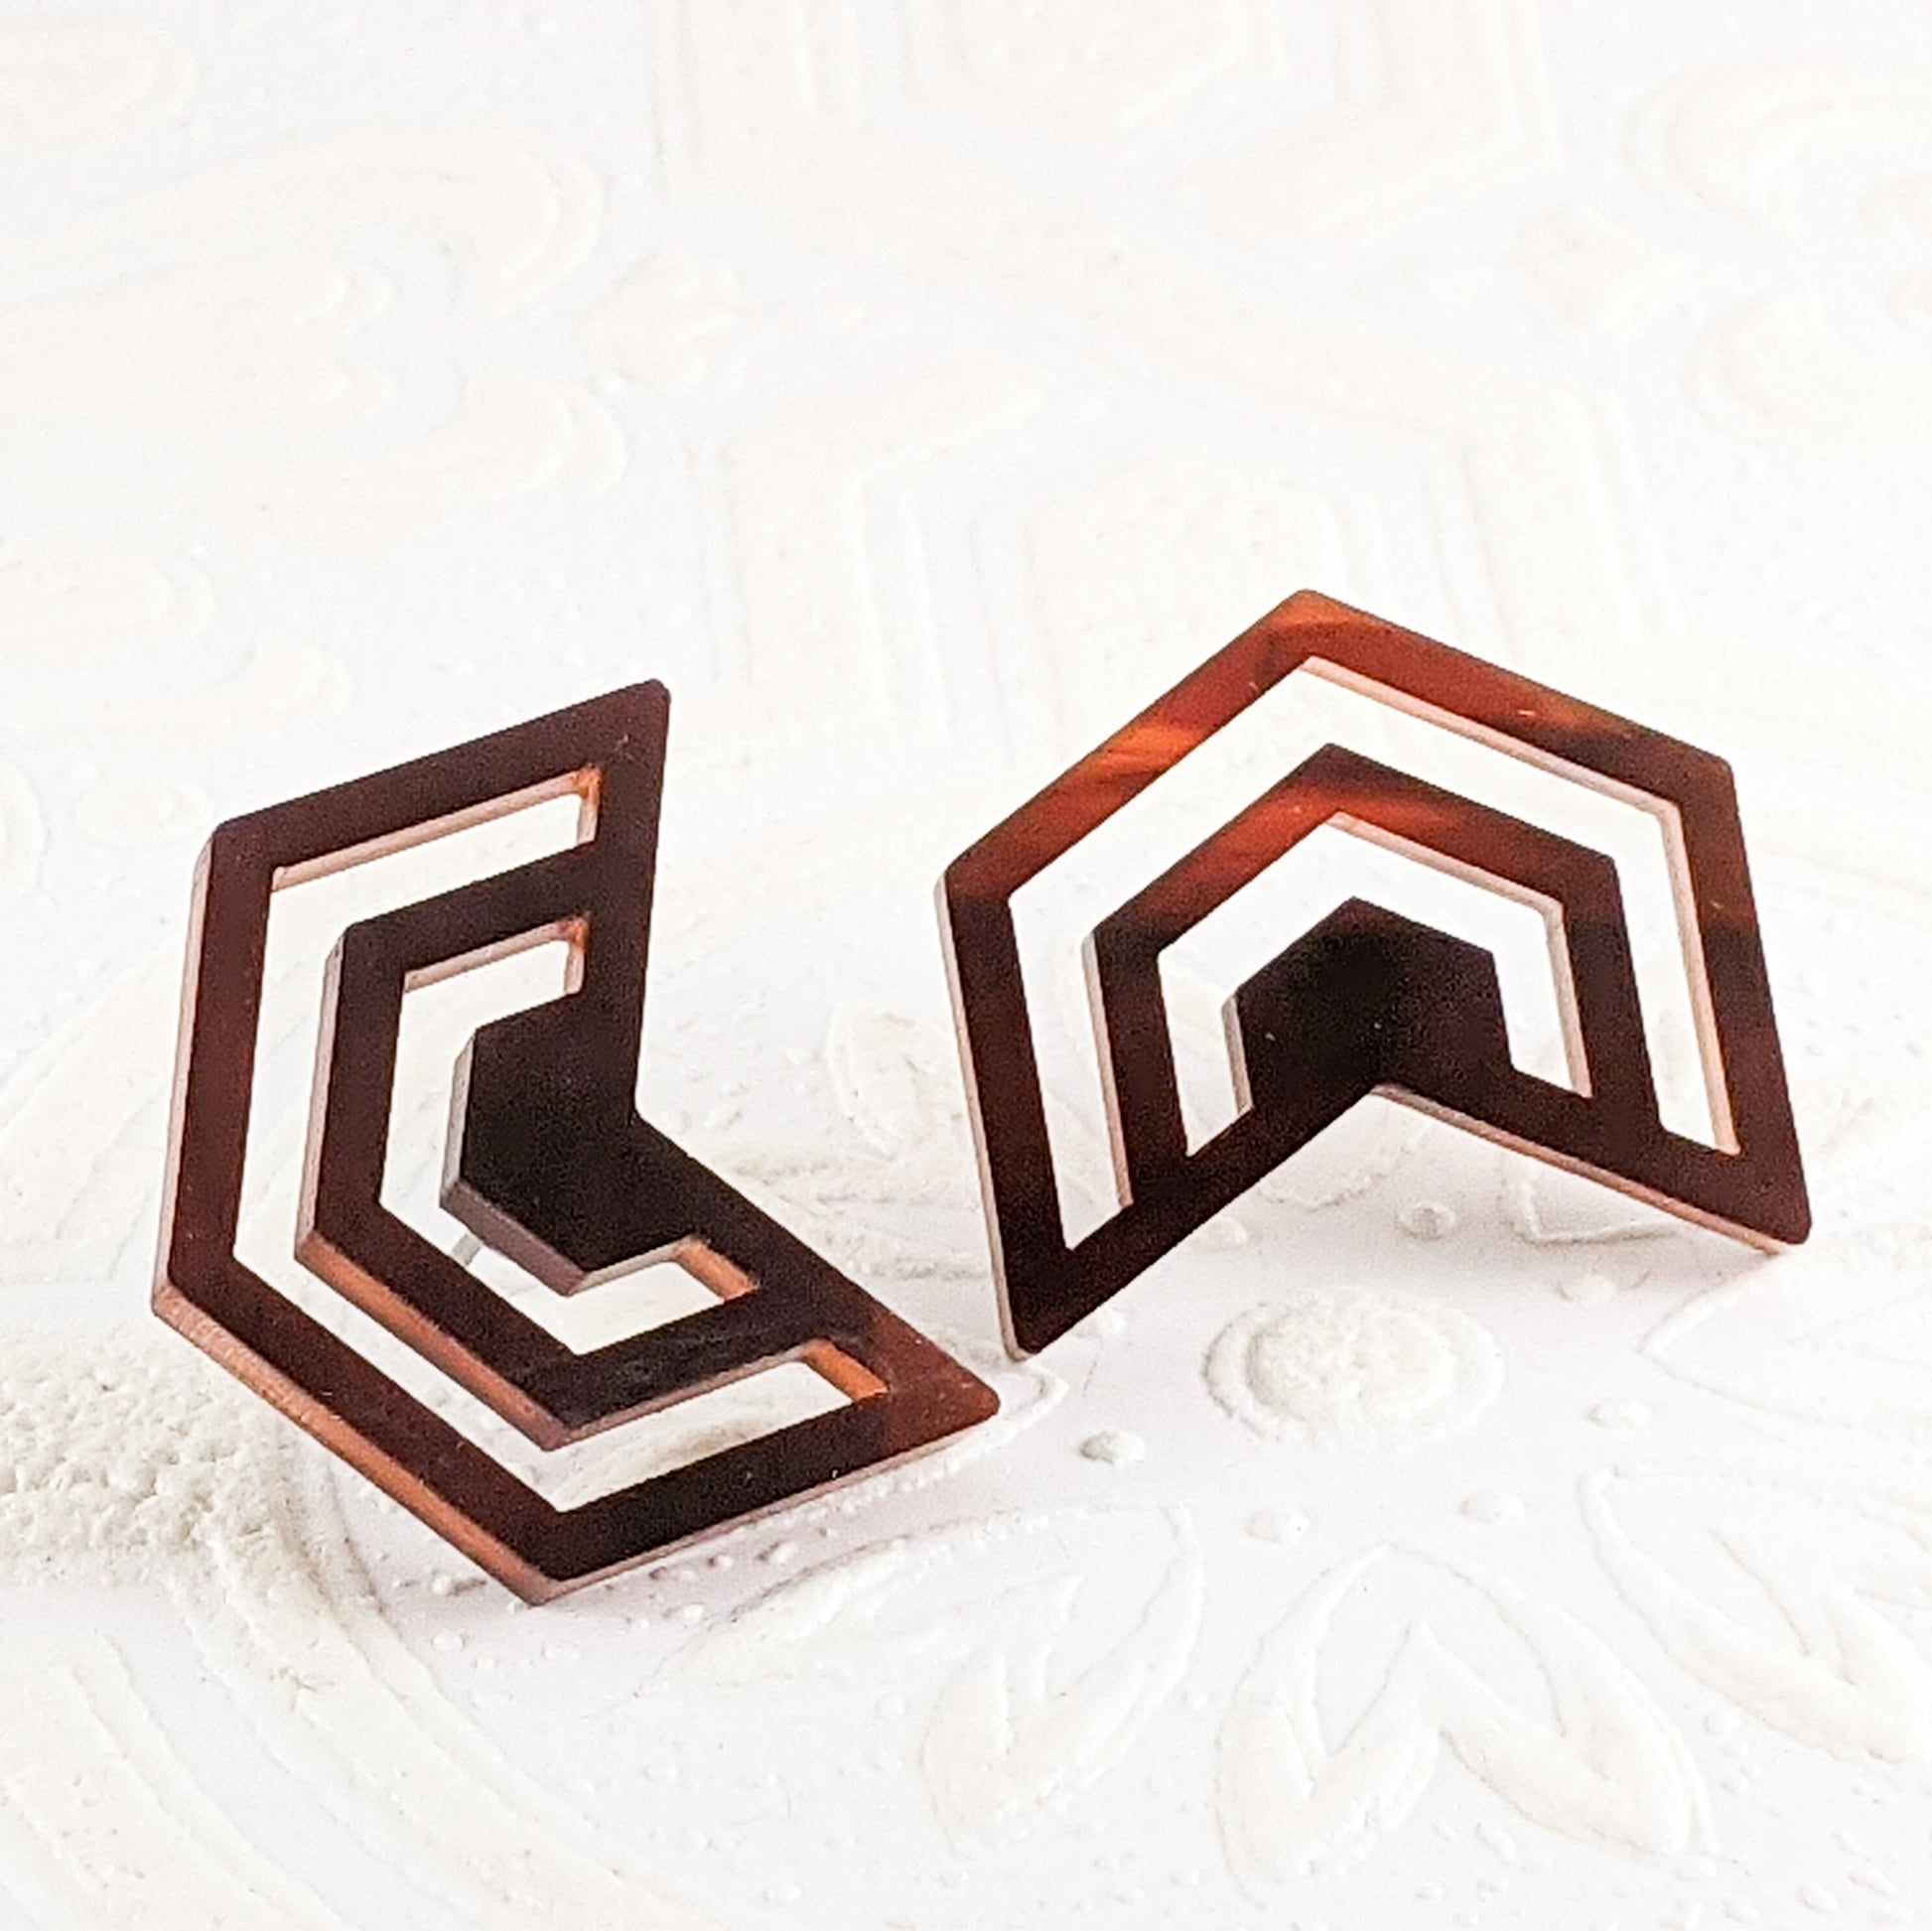 Warm translucent brown and gold tortoiseshell acrylic cut into Irregular Radiating Hexagon Earrings by Isette